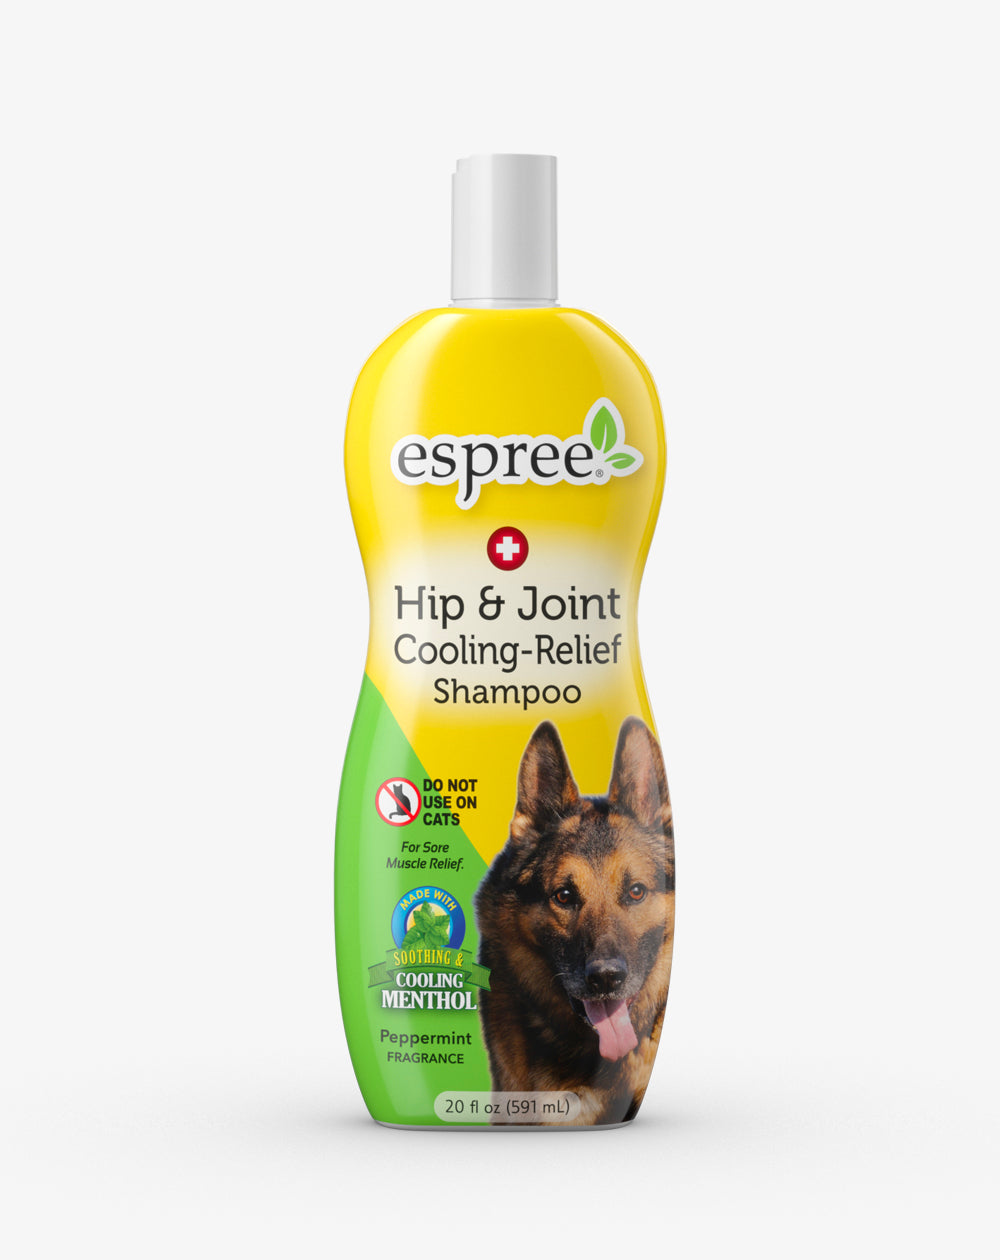 HIP & JOINT COOLING RELIEF SHAMPOO 20 oz